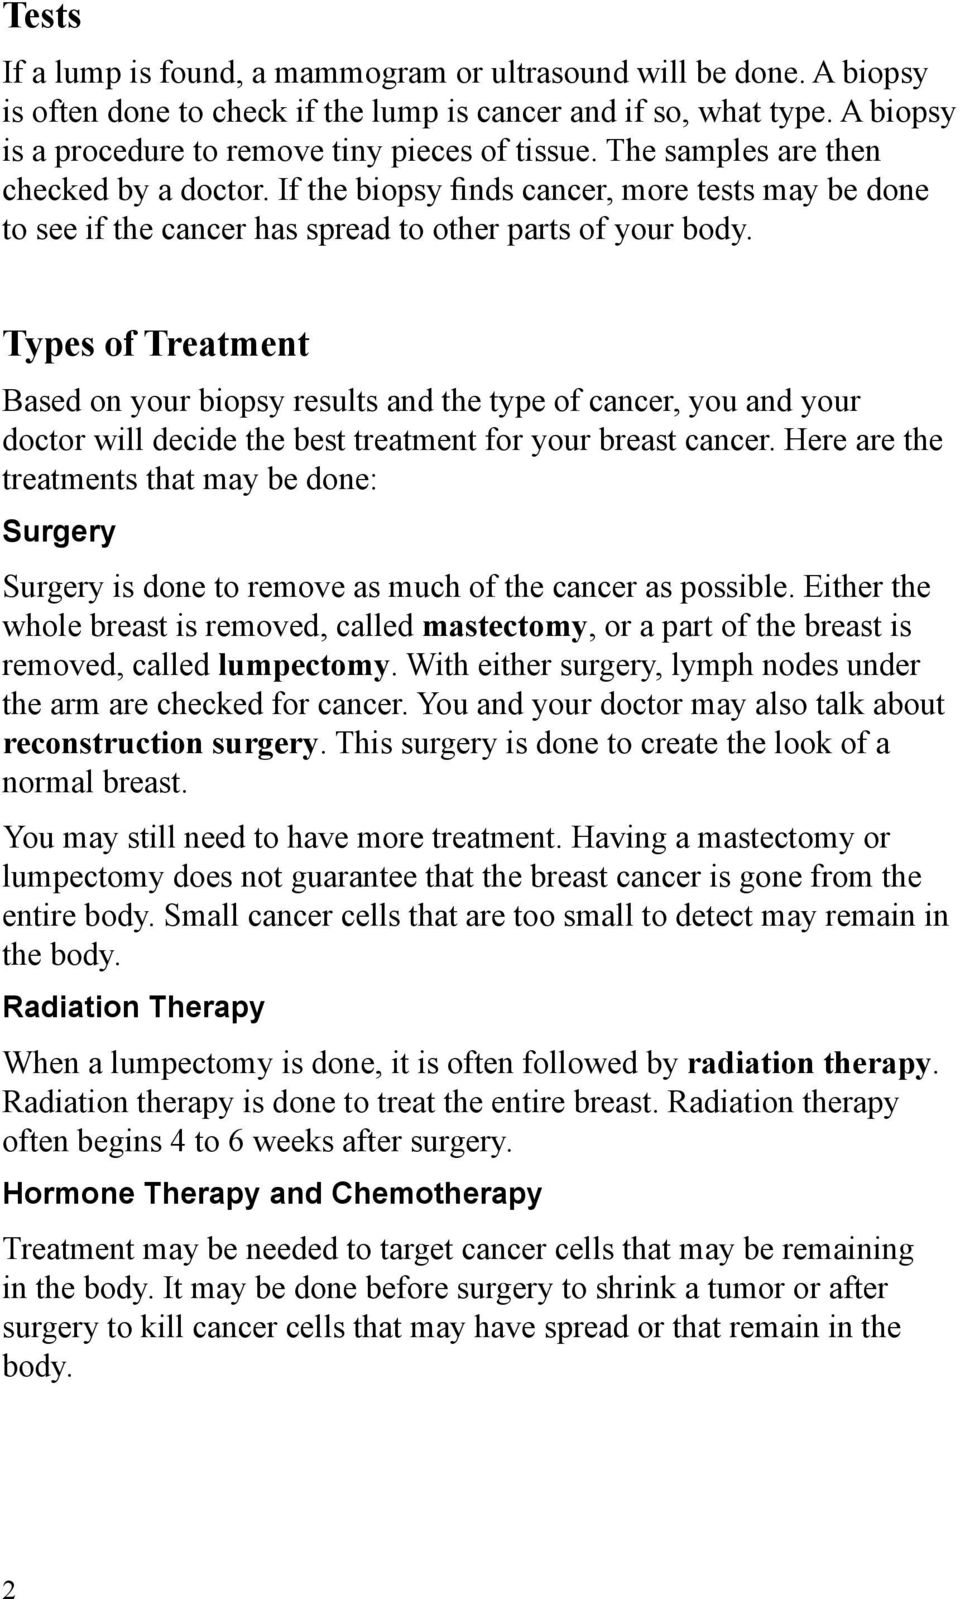 Types of Treatment Based on your biopsy results and the type of cancer, you and your doctor will decide the best treatment for your breast cancer.